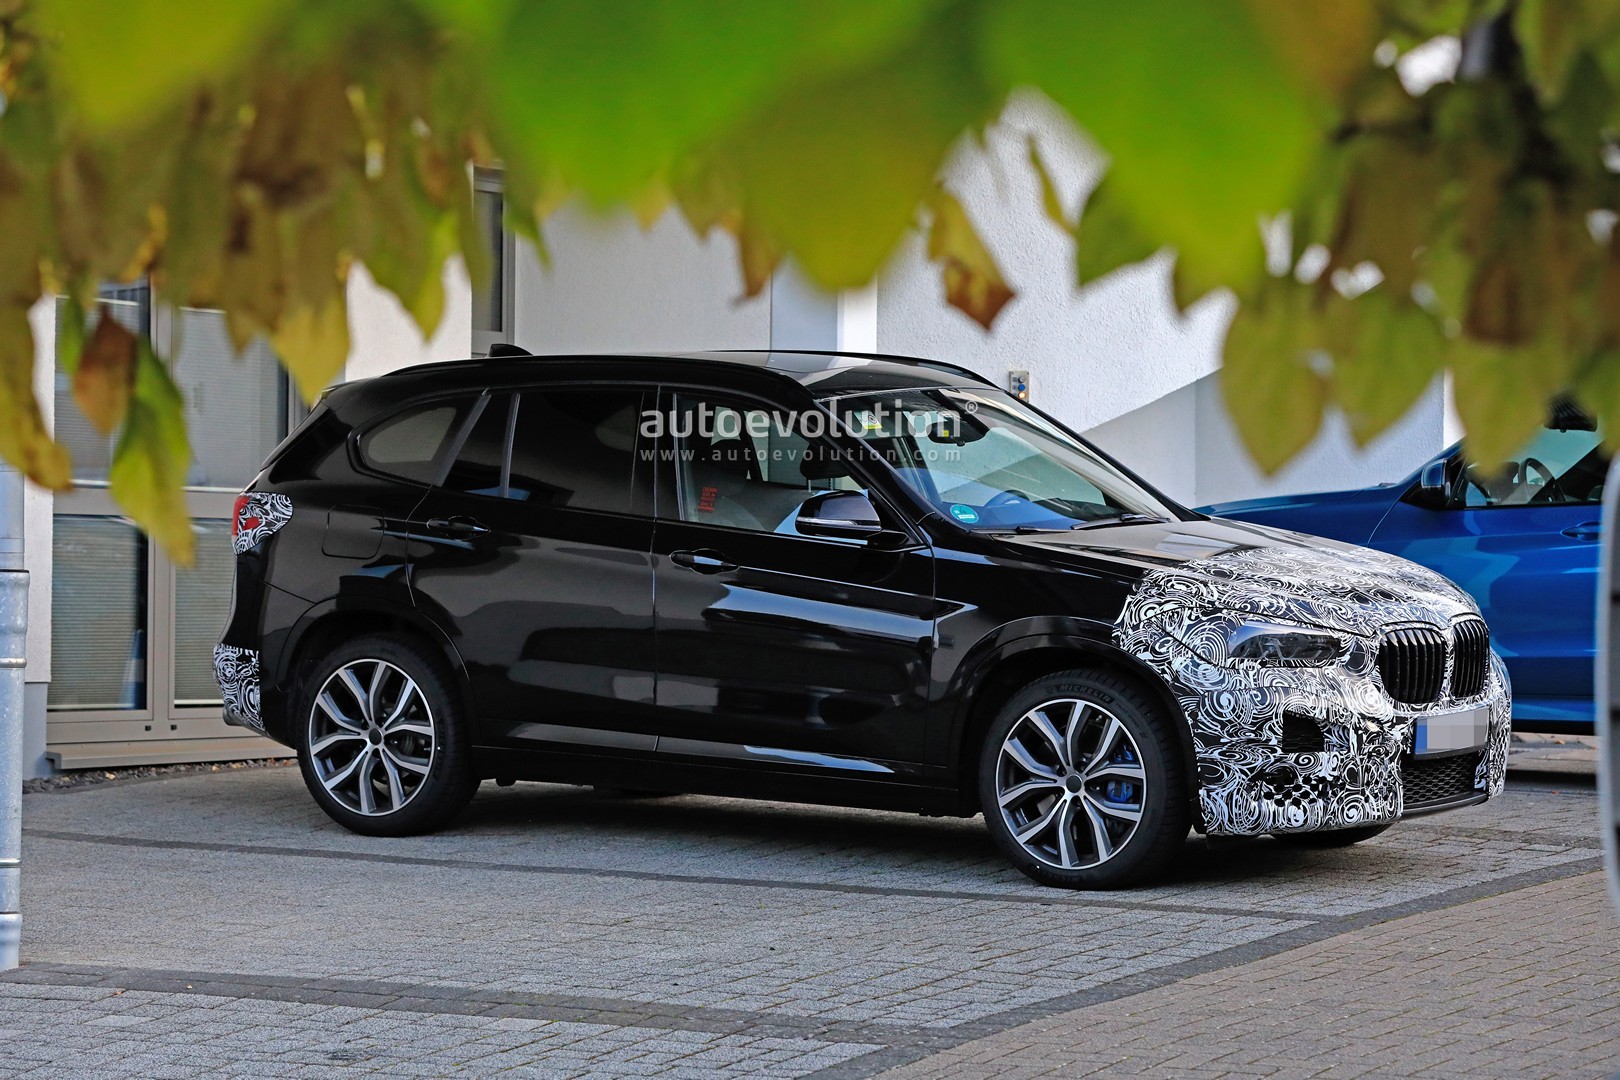 2020 BMW X1 Facelift Spied With New Headlights, Sporty ...